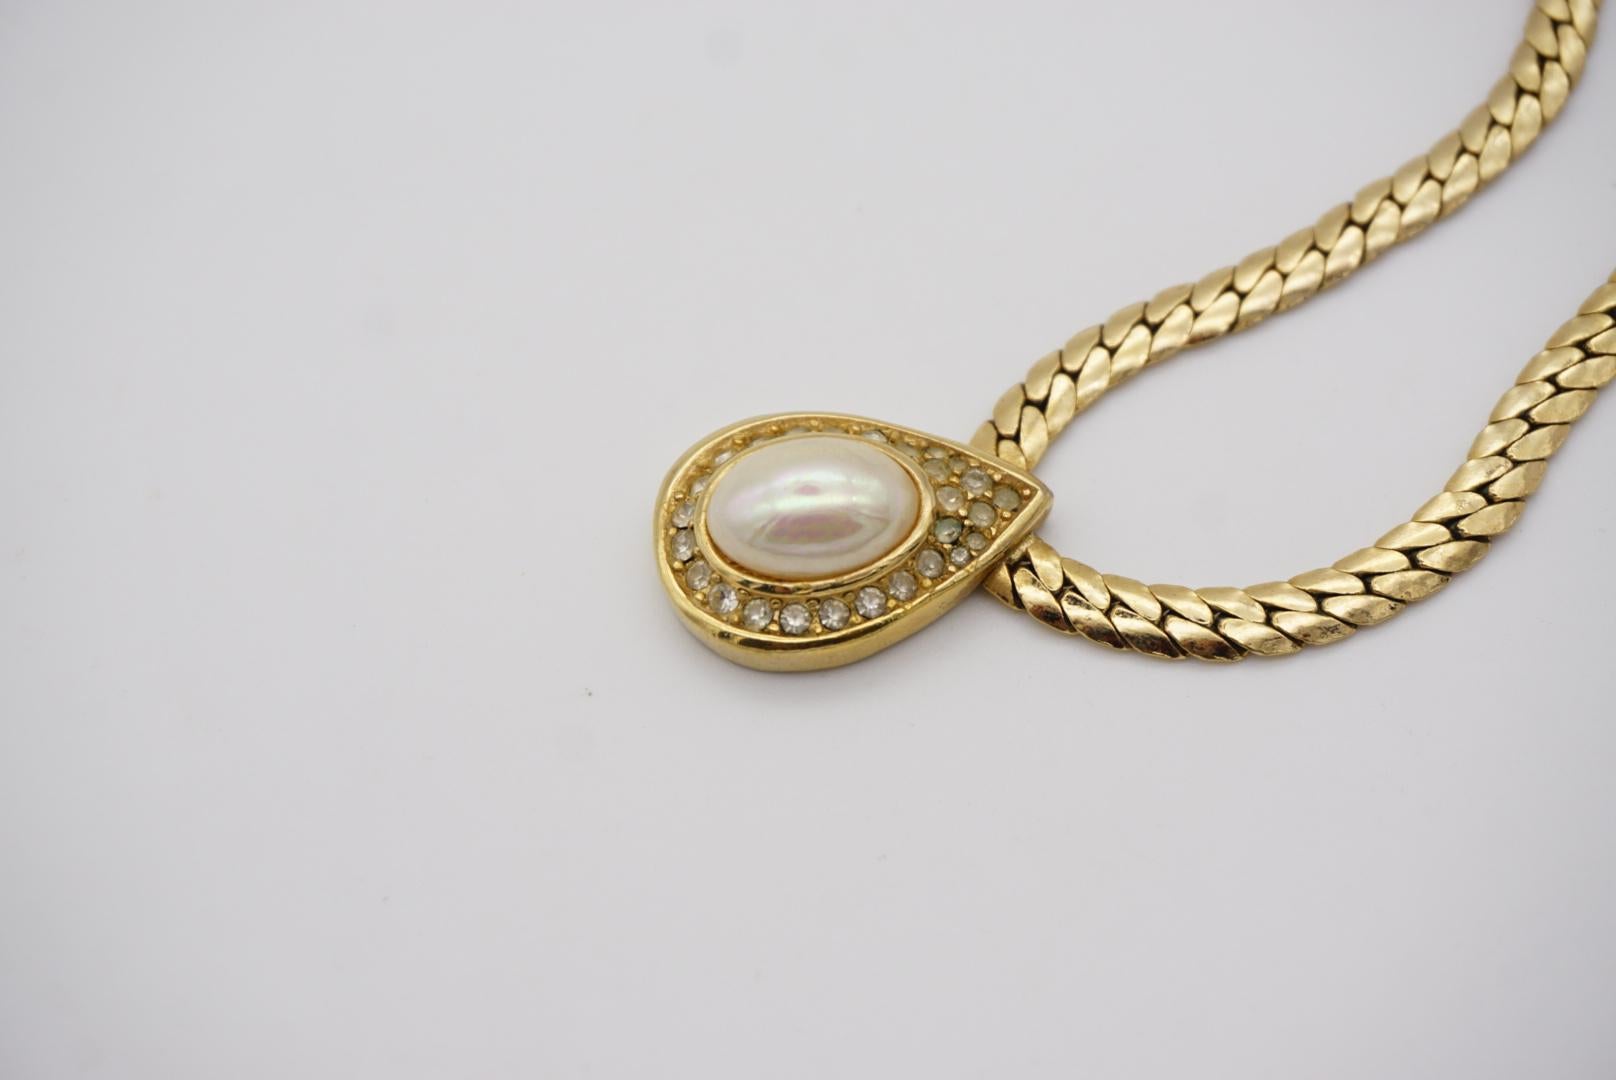 Christian Dior Vintage 1970s Large Oval Pearl Crystals Tear Water Drop Necklace For Sale 1